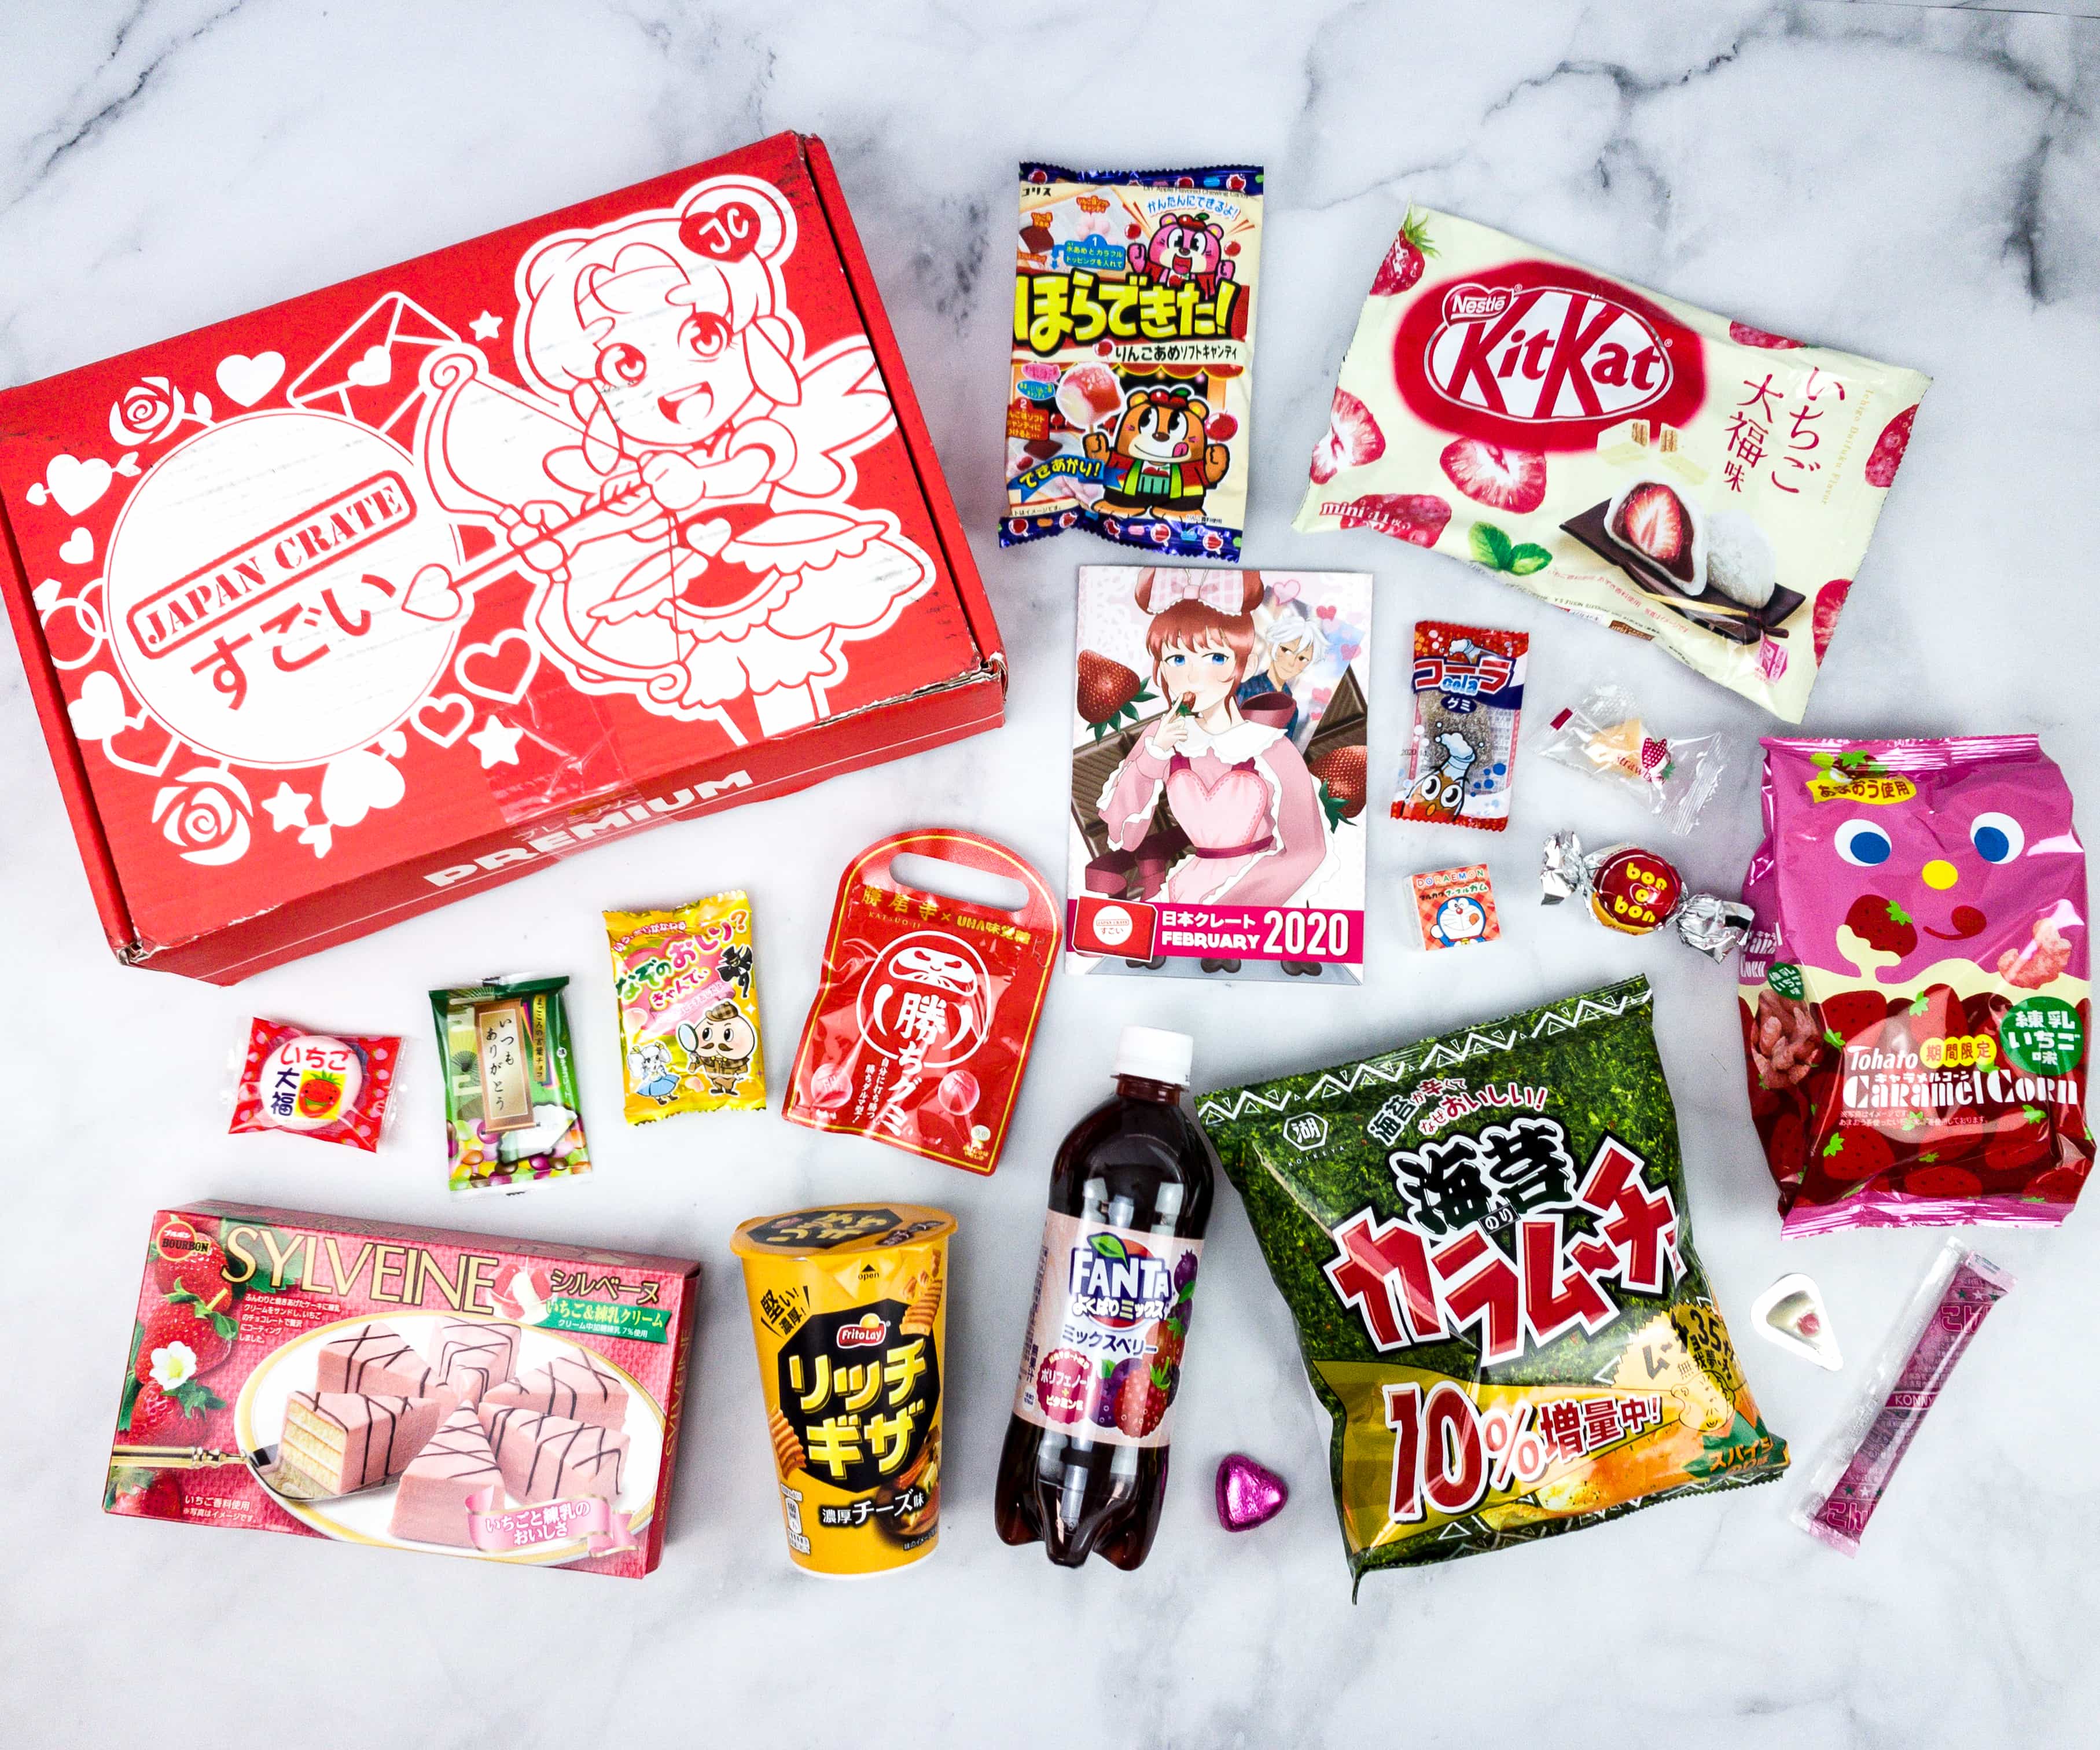 Japan Crate Reviews: Get All The Details At Hello Subscription!